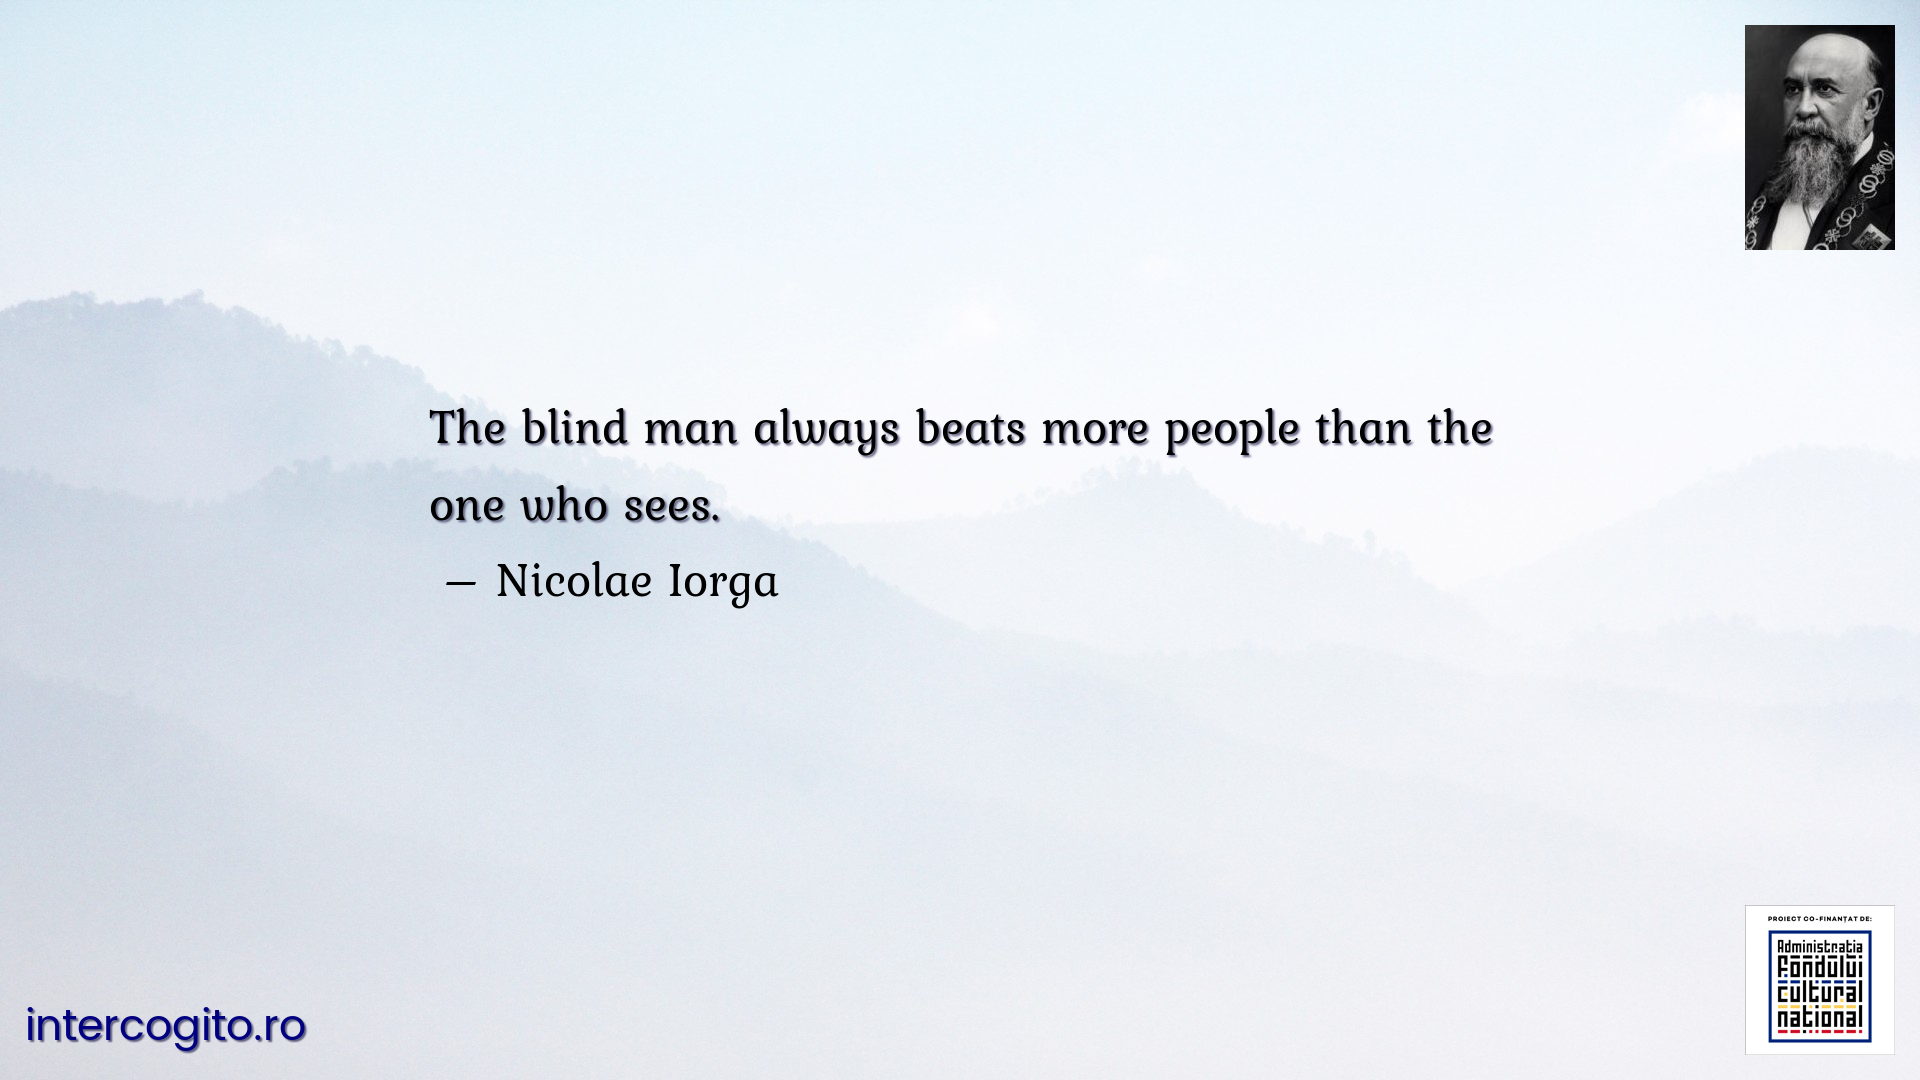 The blind man always beats more people than the one who sees.